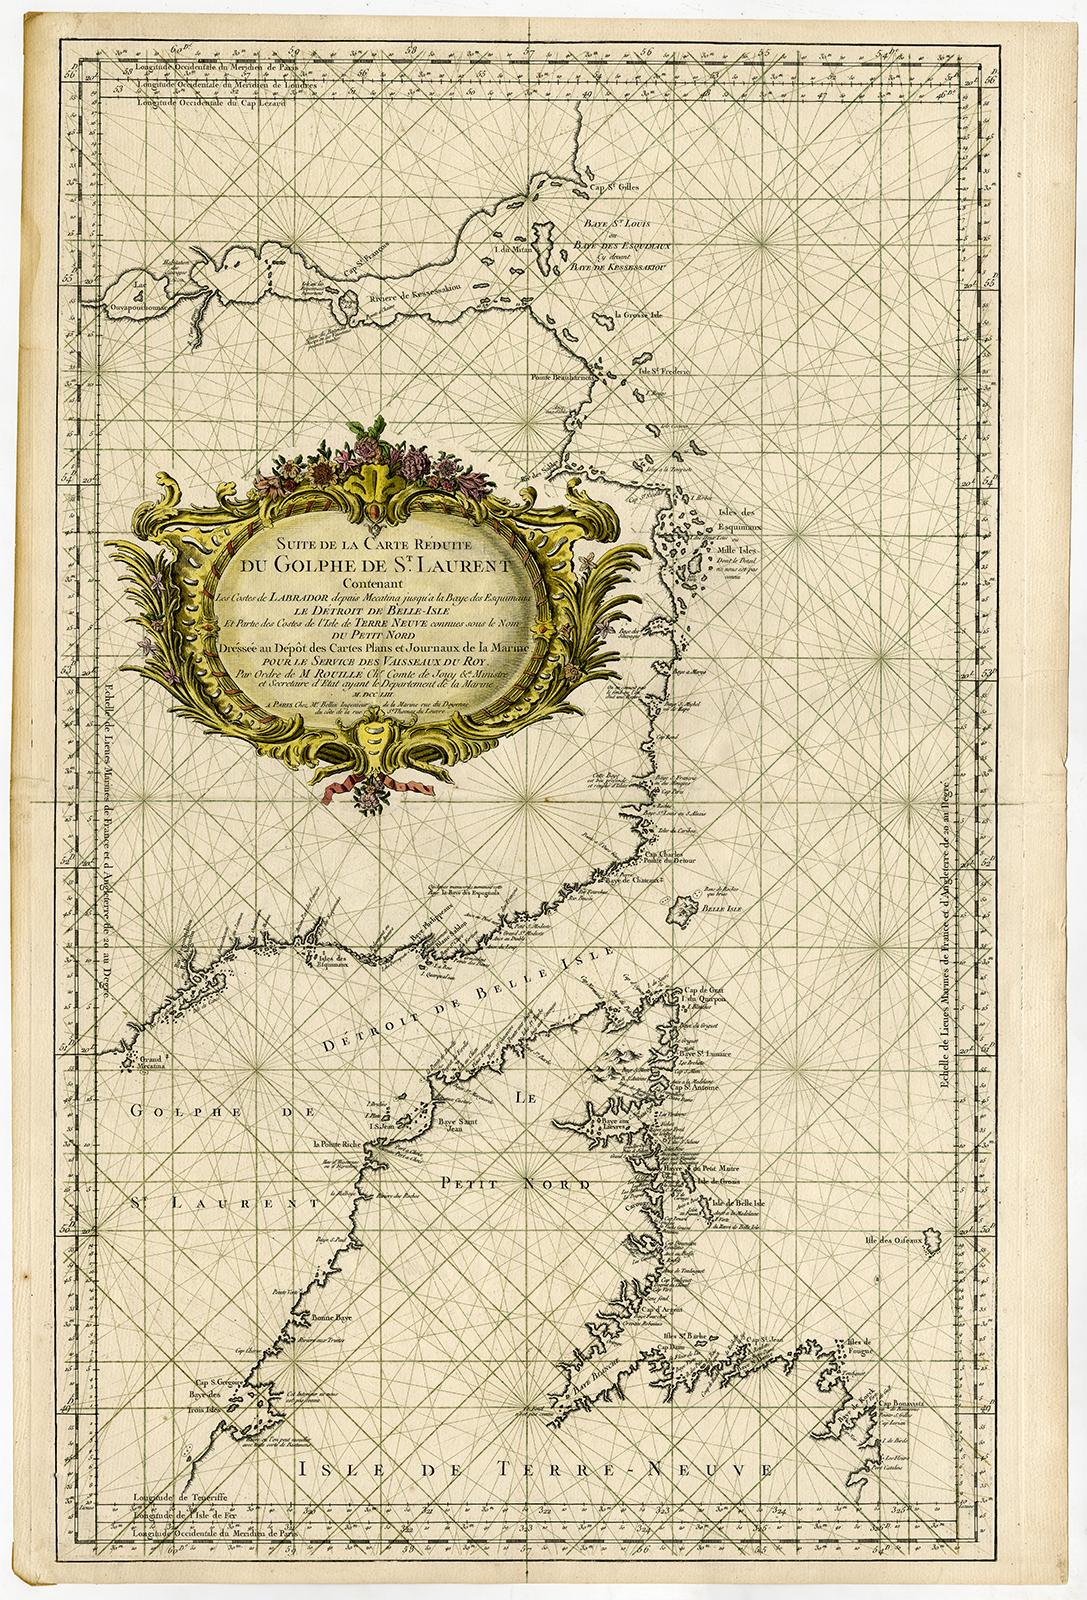 Jacques Nicolas Bellin Print - Sea chart of Gulf of Saint Laurence and Belle Isle - Engraving - 18th century